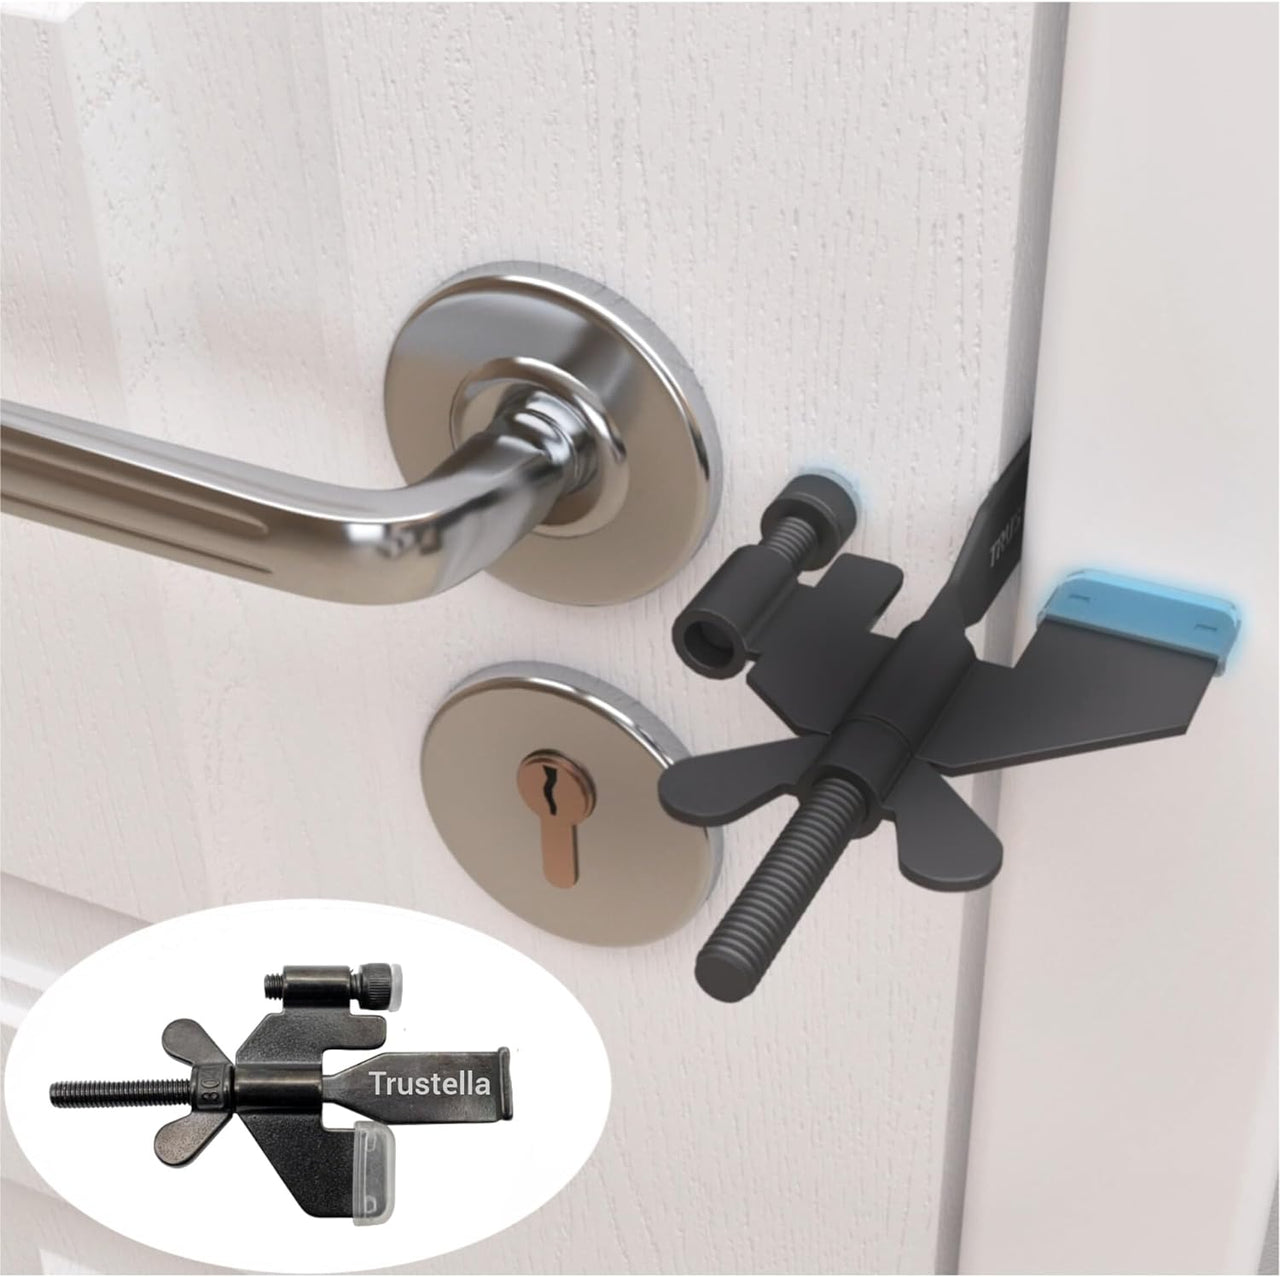 Stainless Steel Adjustable Portable Door Lock - Heavy Duty Security for Home, Hotel, Apartment, College Dorm & Travel - with Silicone Protection Caps